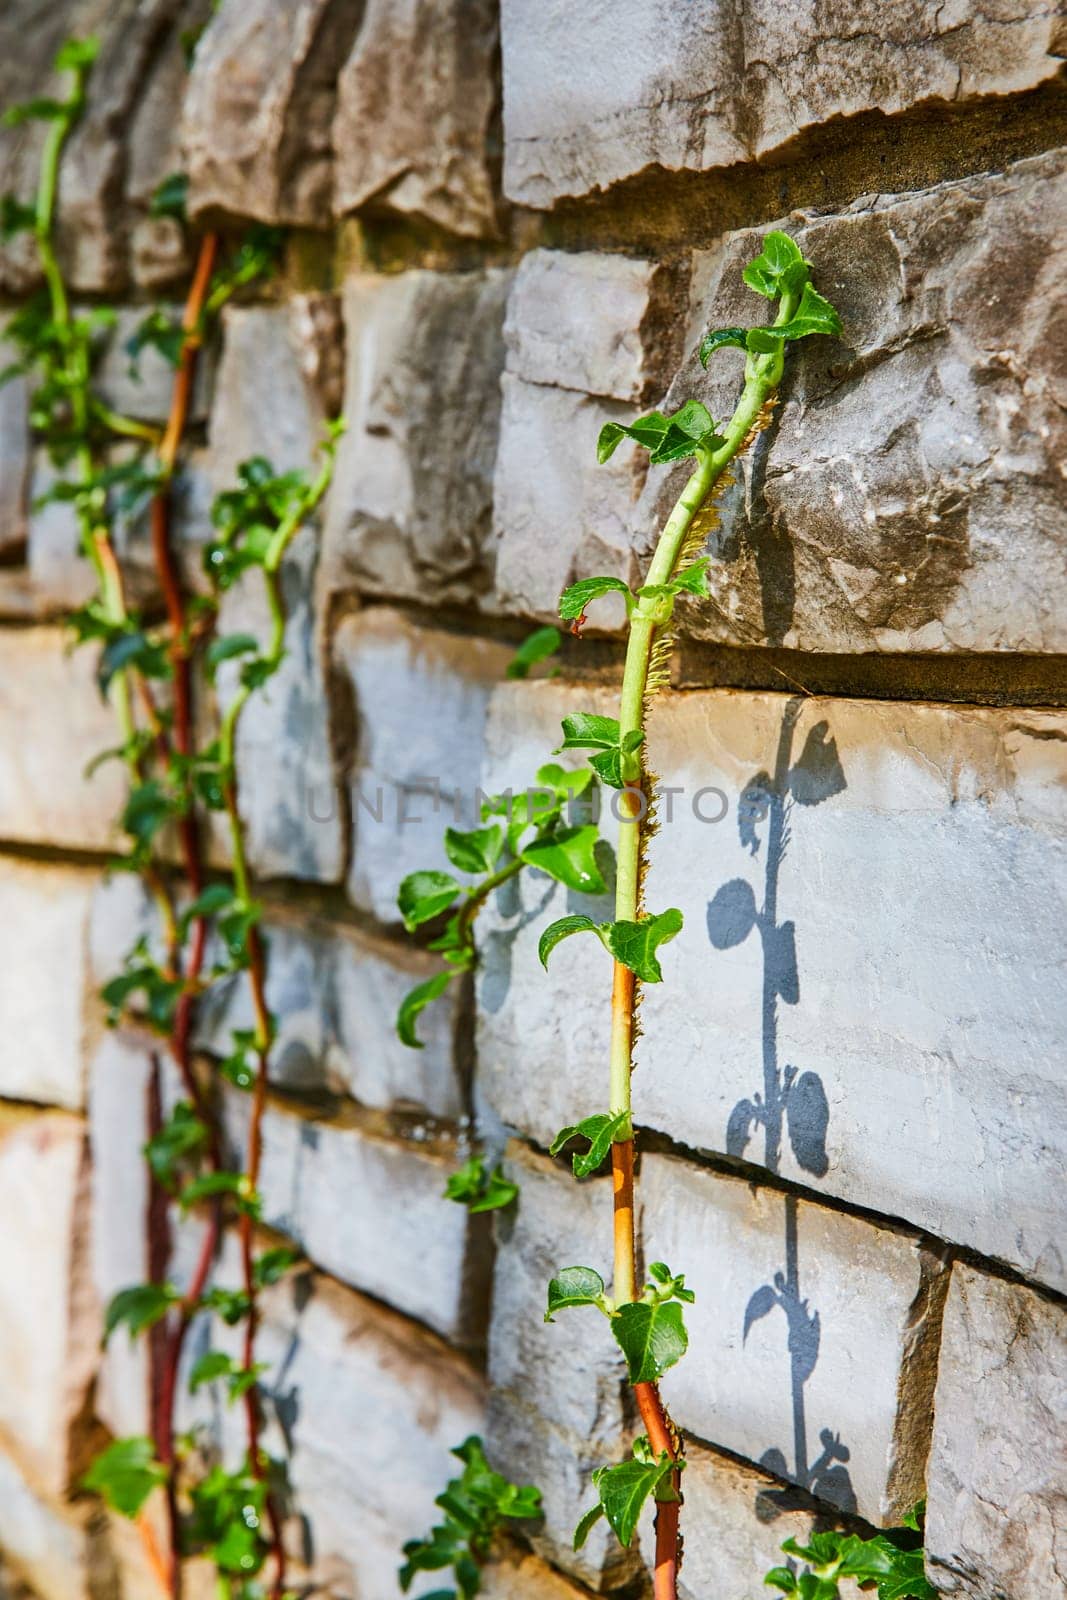 Vibrant Vine on Rustic Stone Wall, Sunlit Leaf Shadows by njproductions